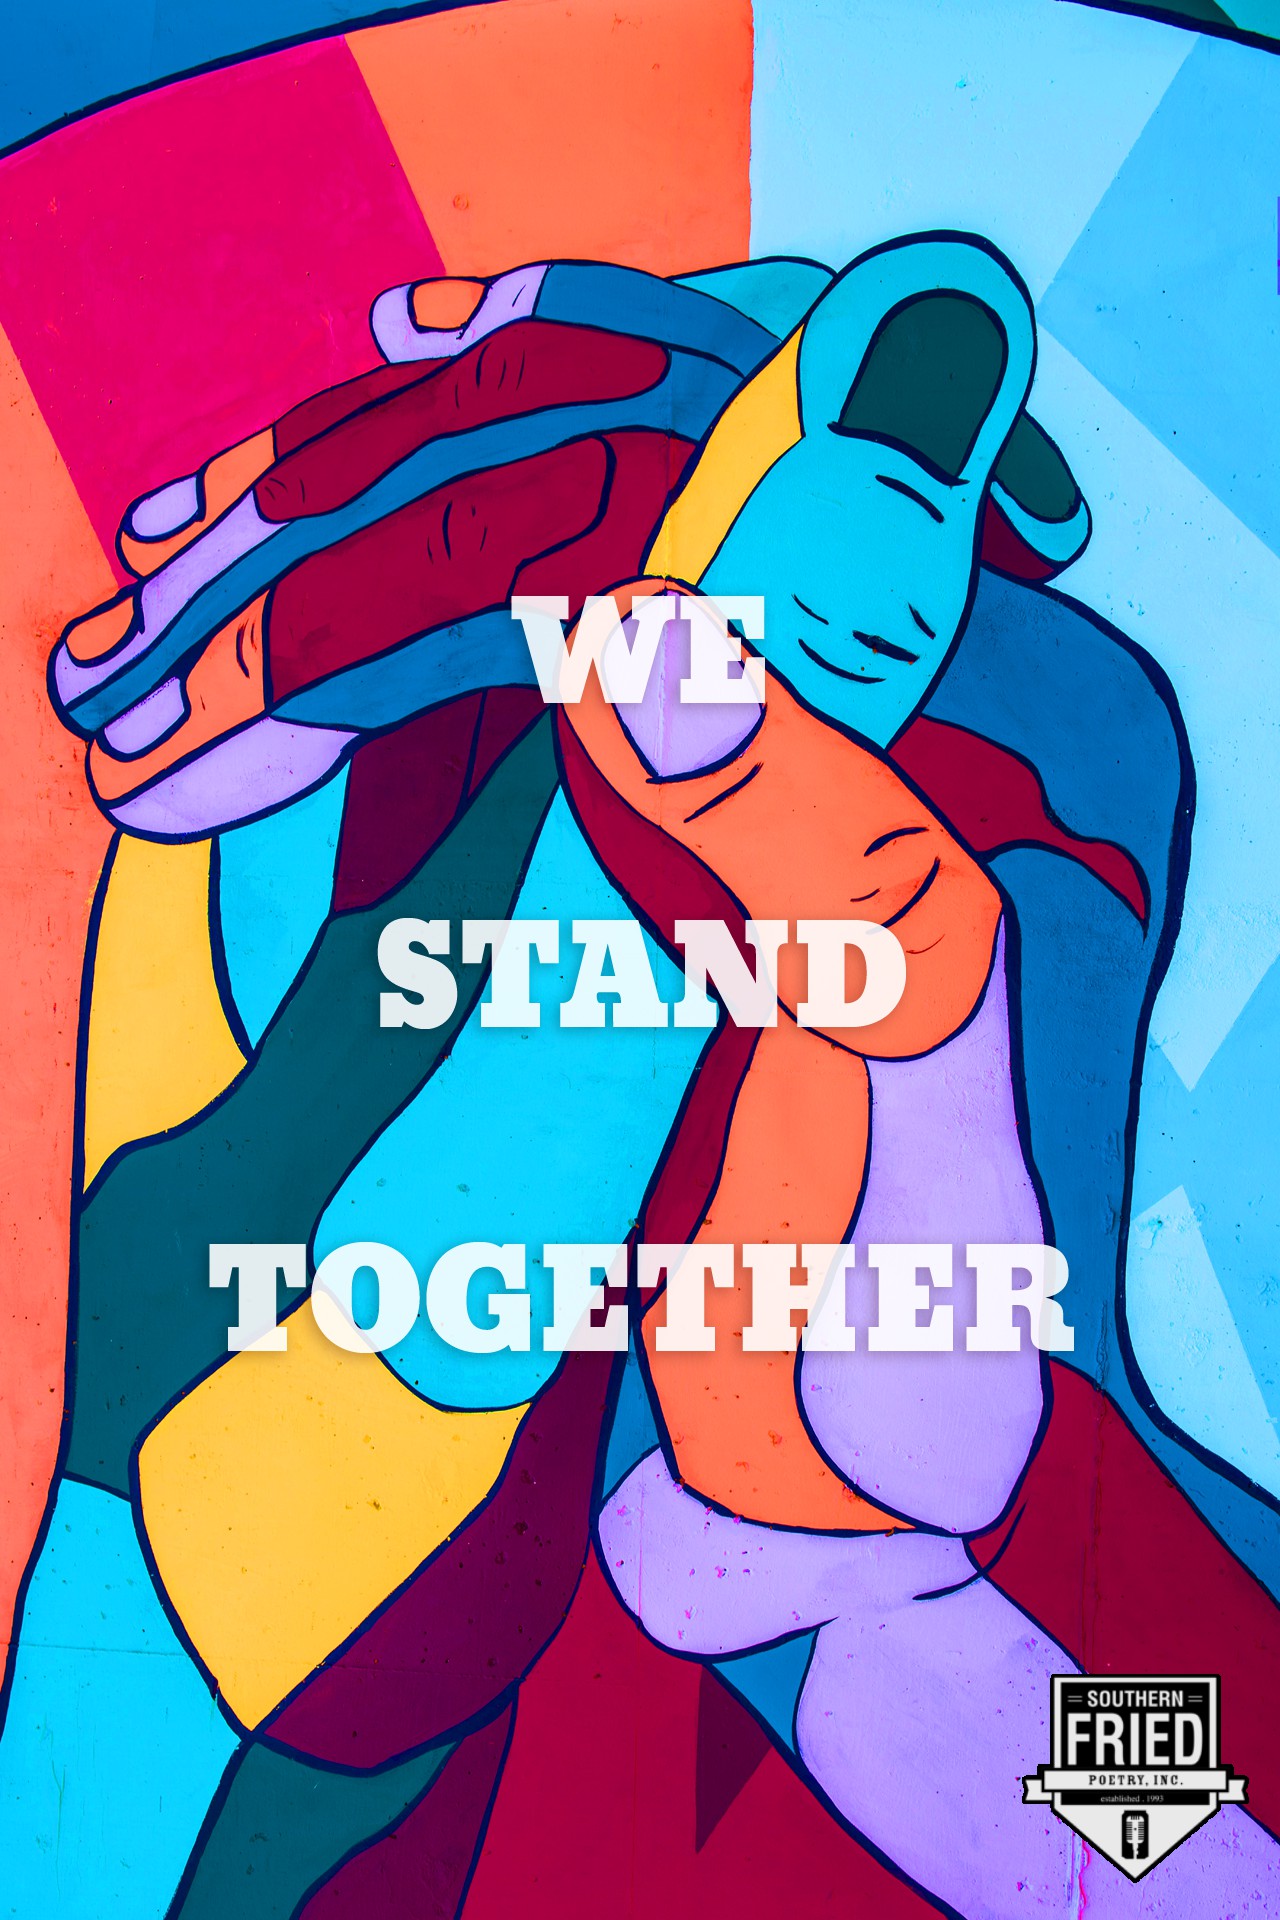 we stand together